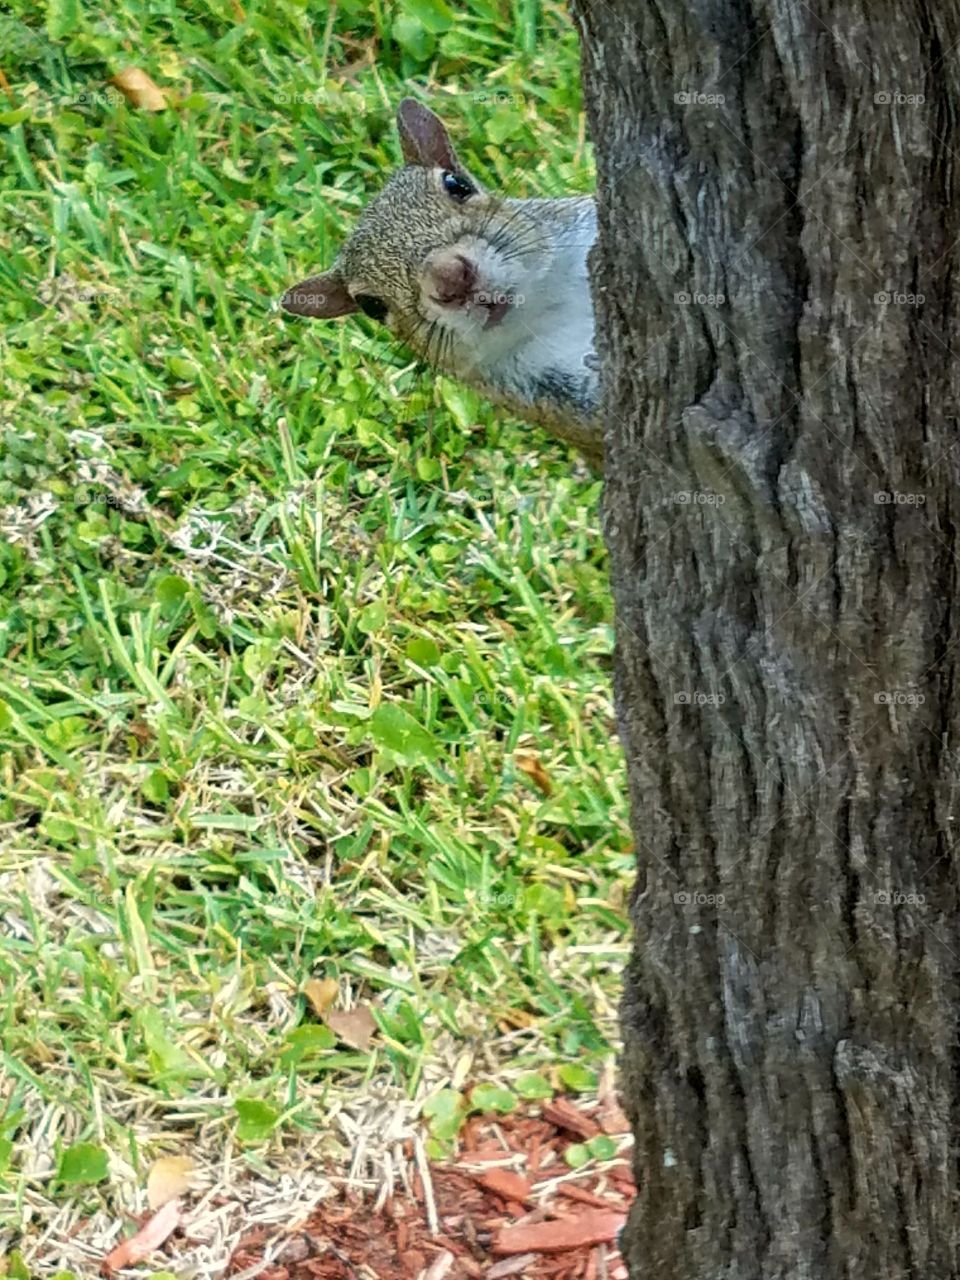 Squirrel Checking Me Out